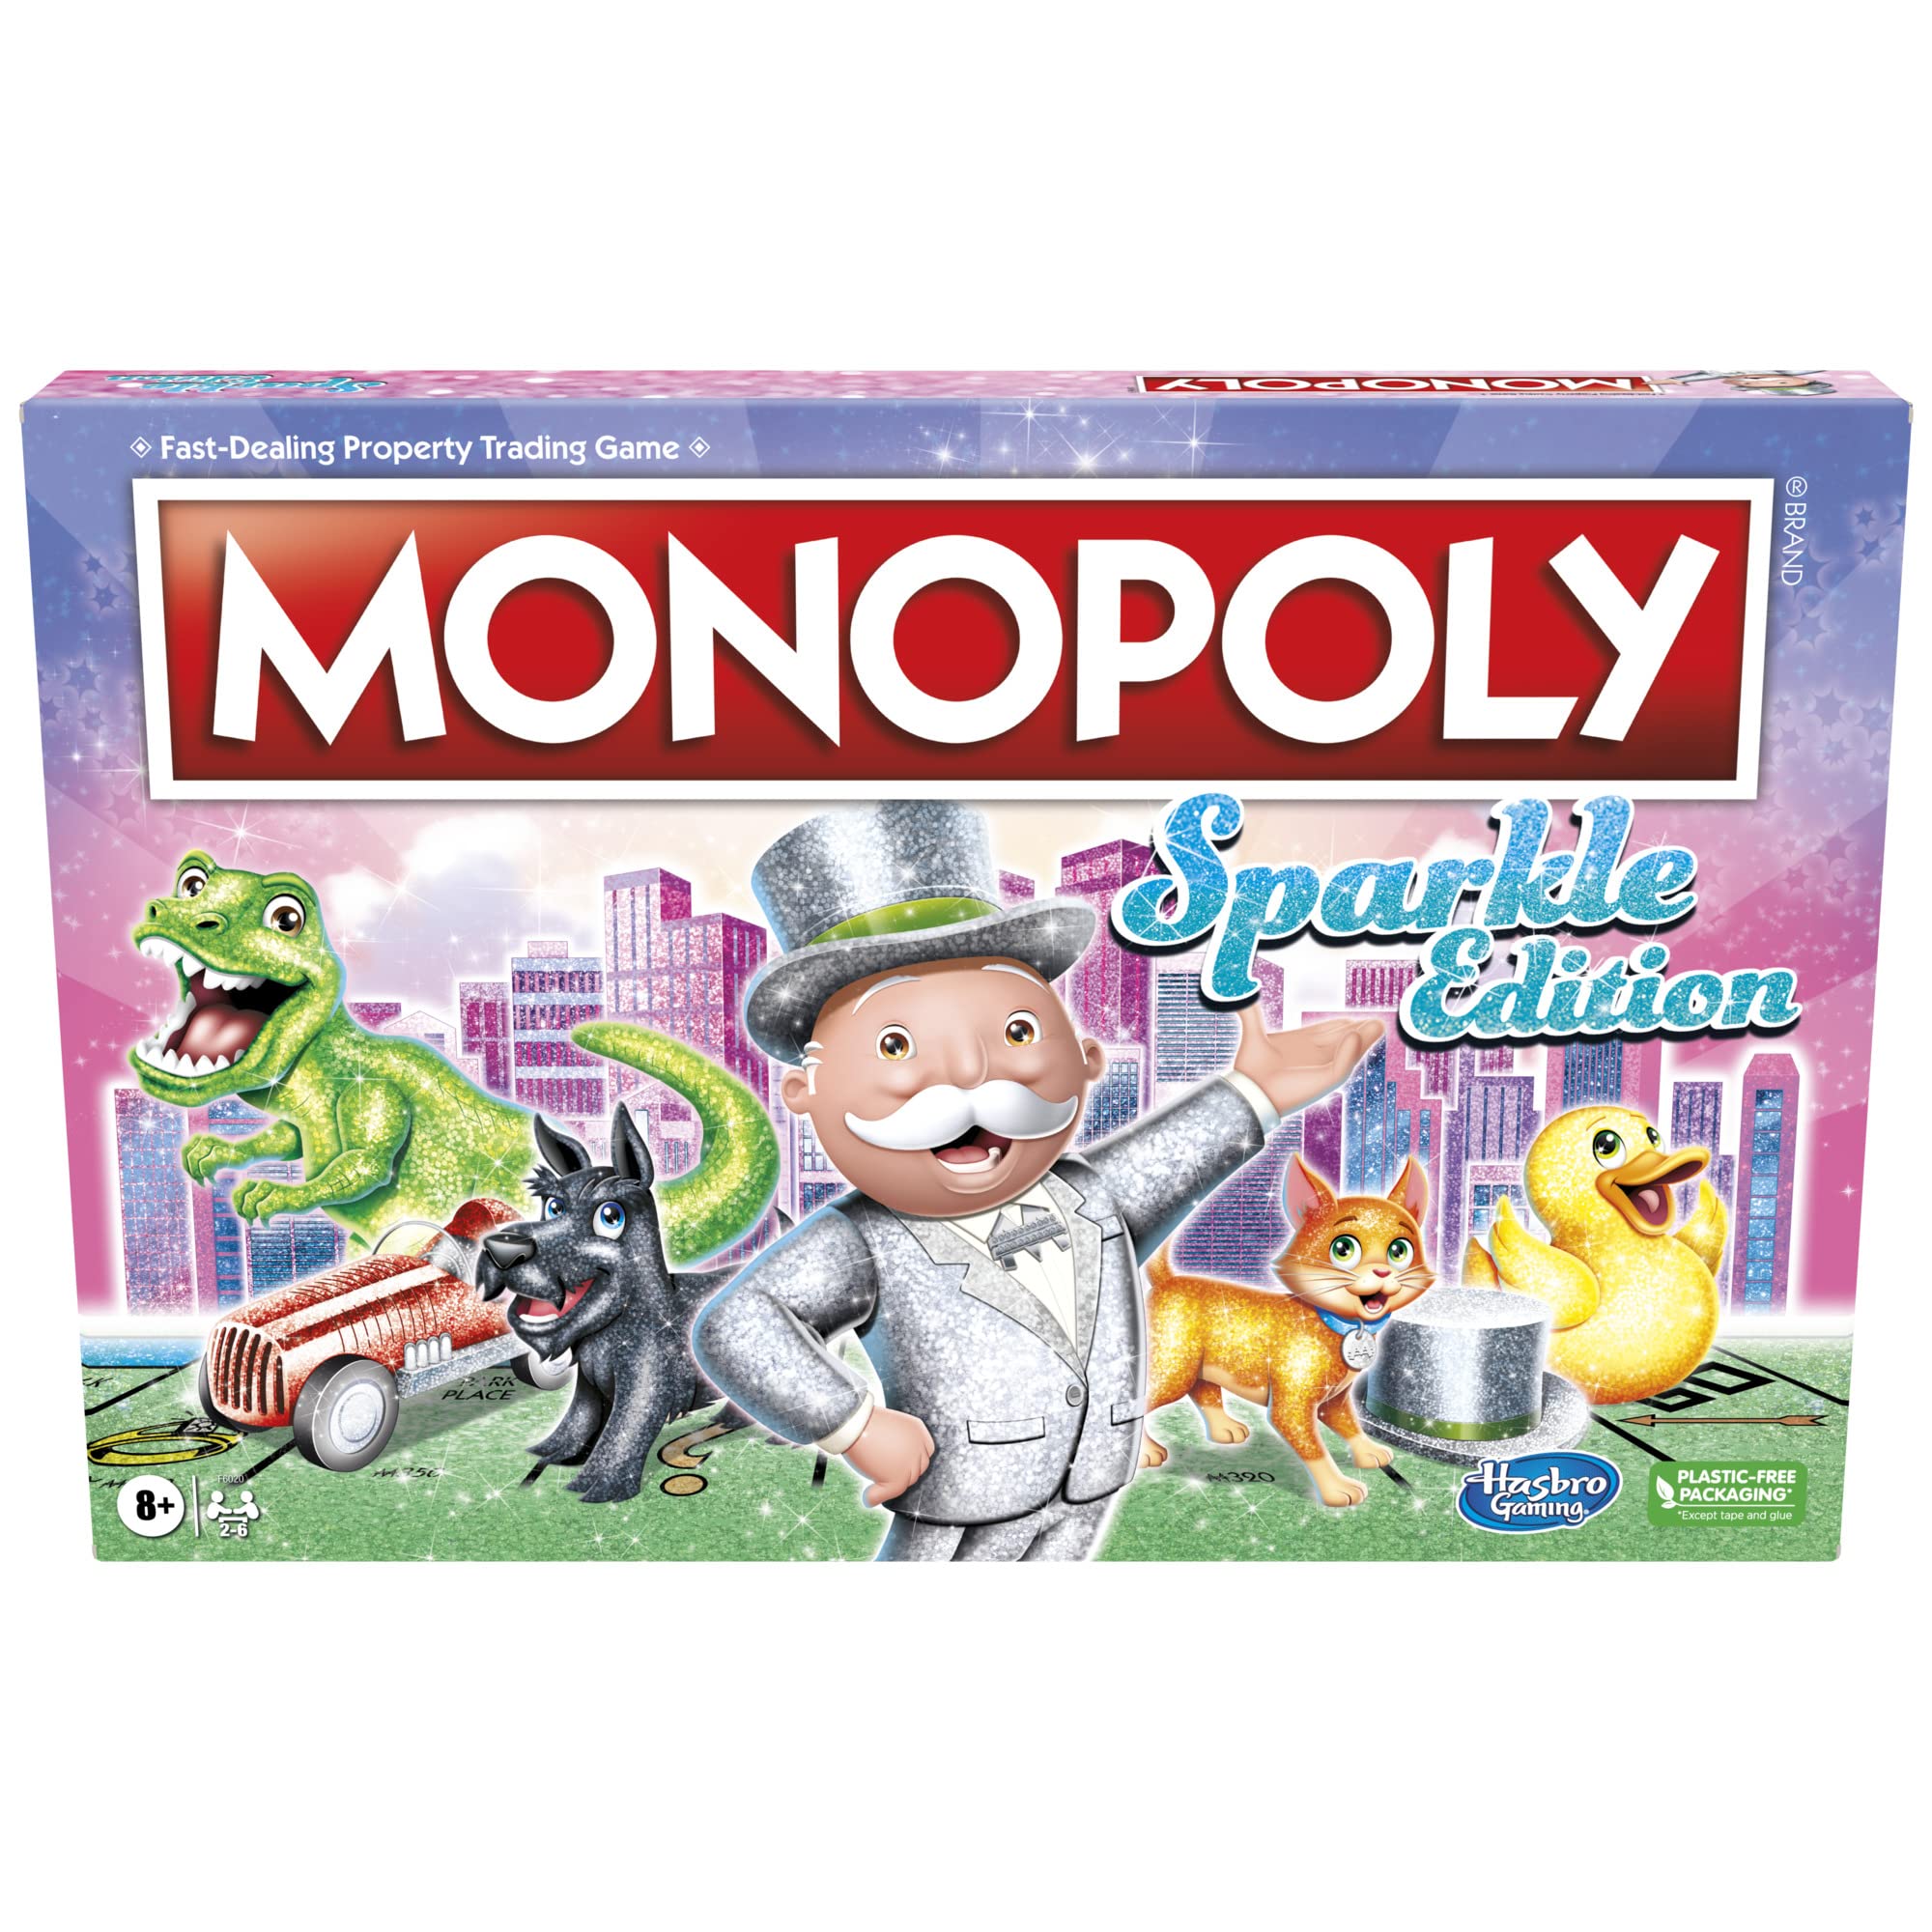 Monopoly Sparkle Edition Board Game, Family Games, with Glittery Tokens, Pearlescent Dice, Sparkly Look, (Amazon Exclusive), 2-6 players